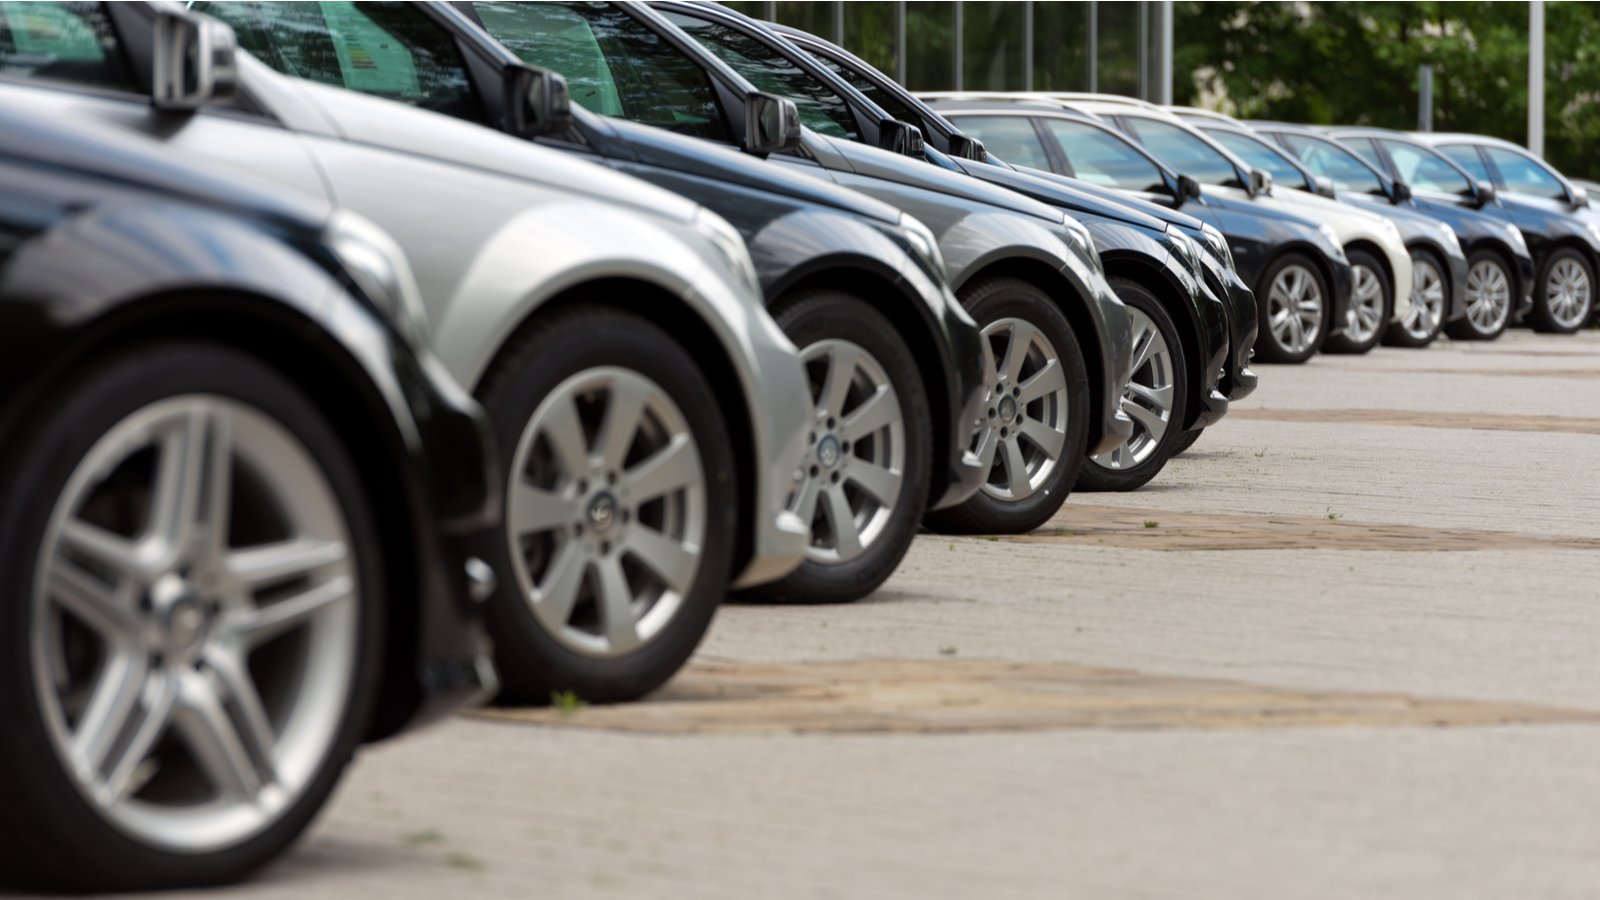 An oblique side view of a row of parked cars.